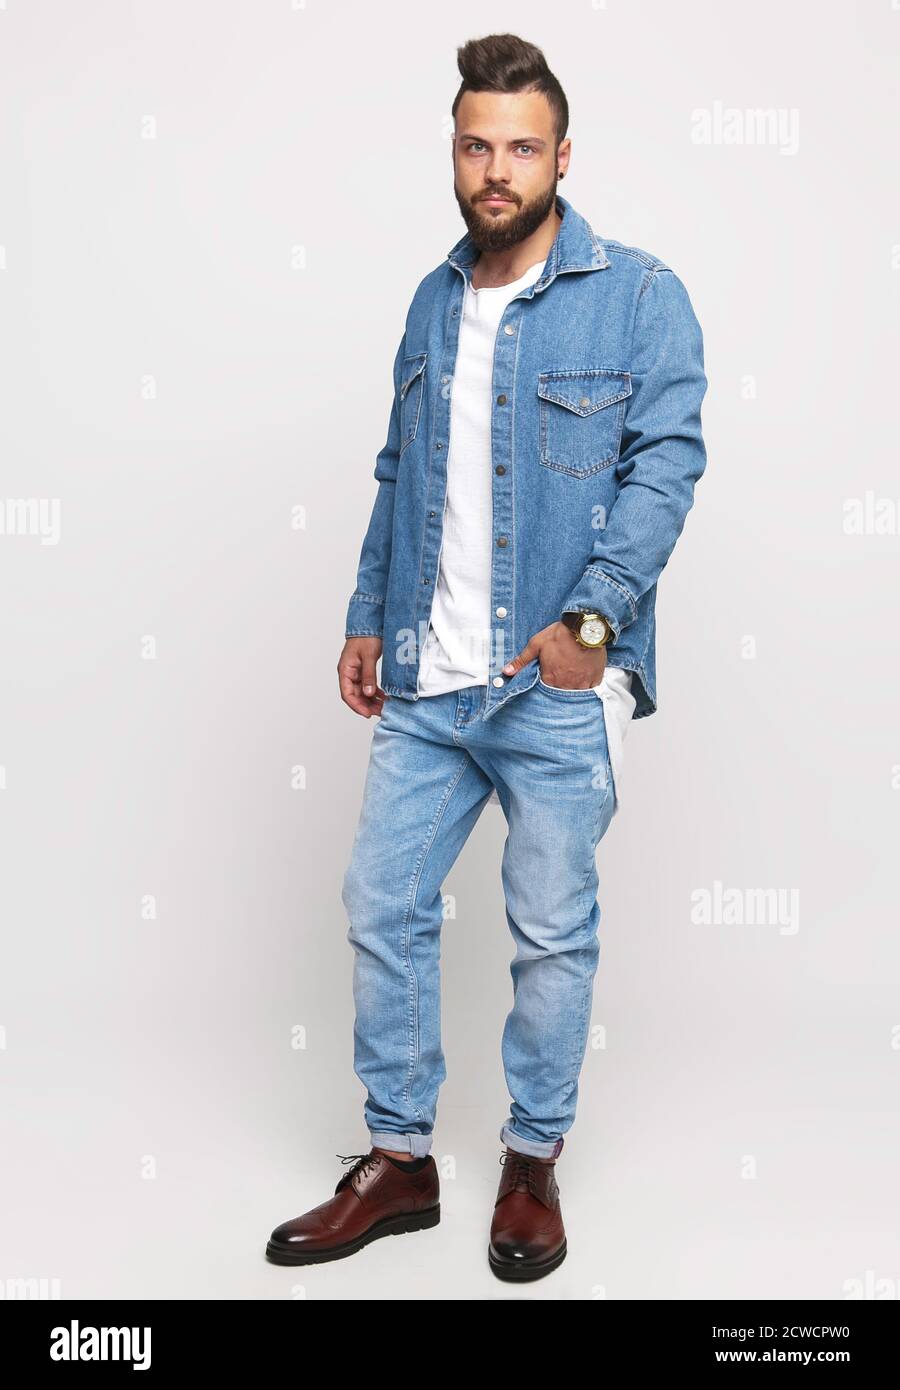 Mens Jeans And Suit Jacket | vlr.eng.br